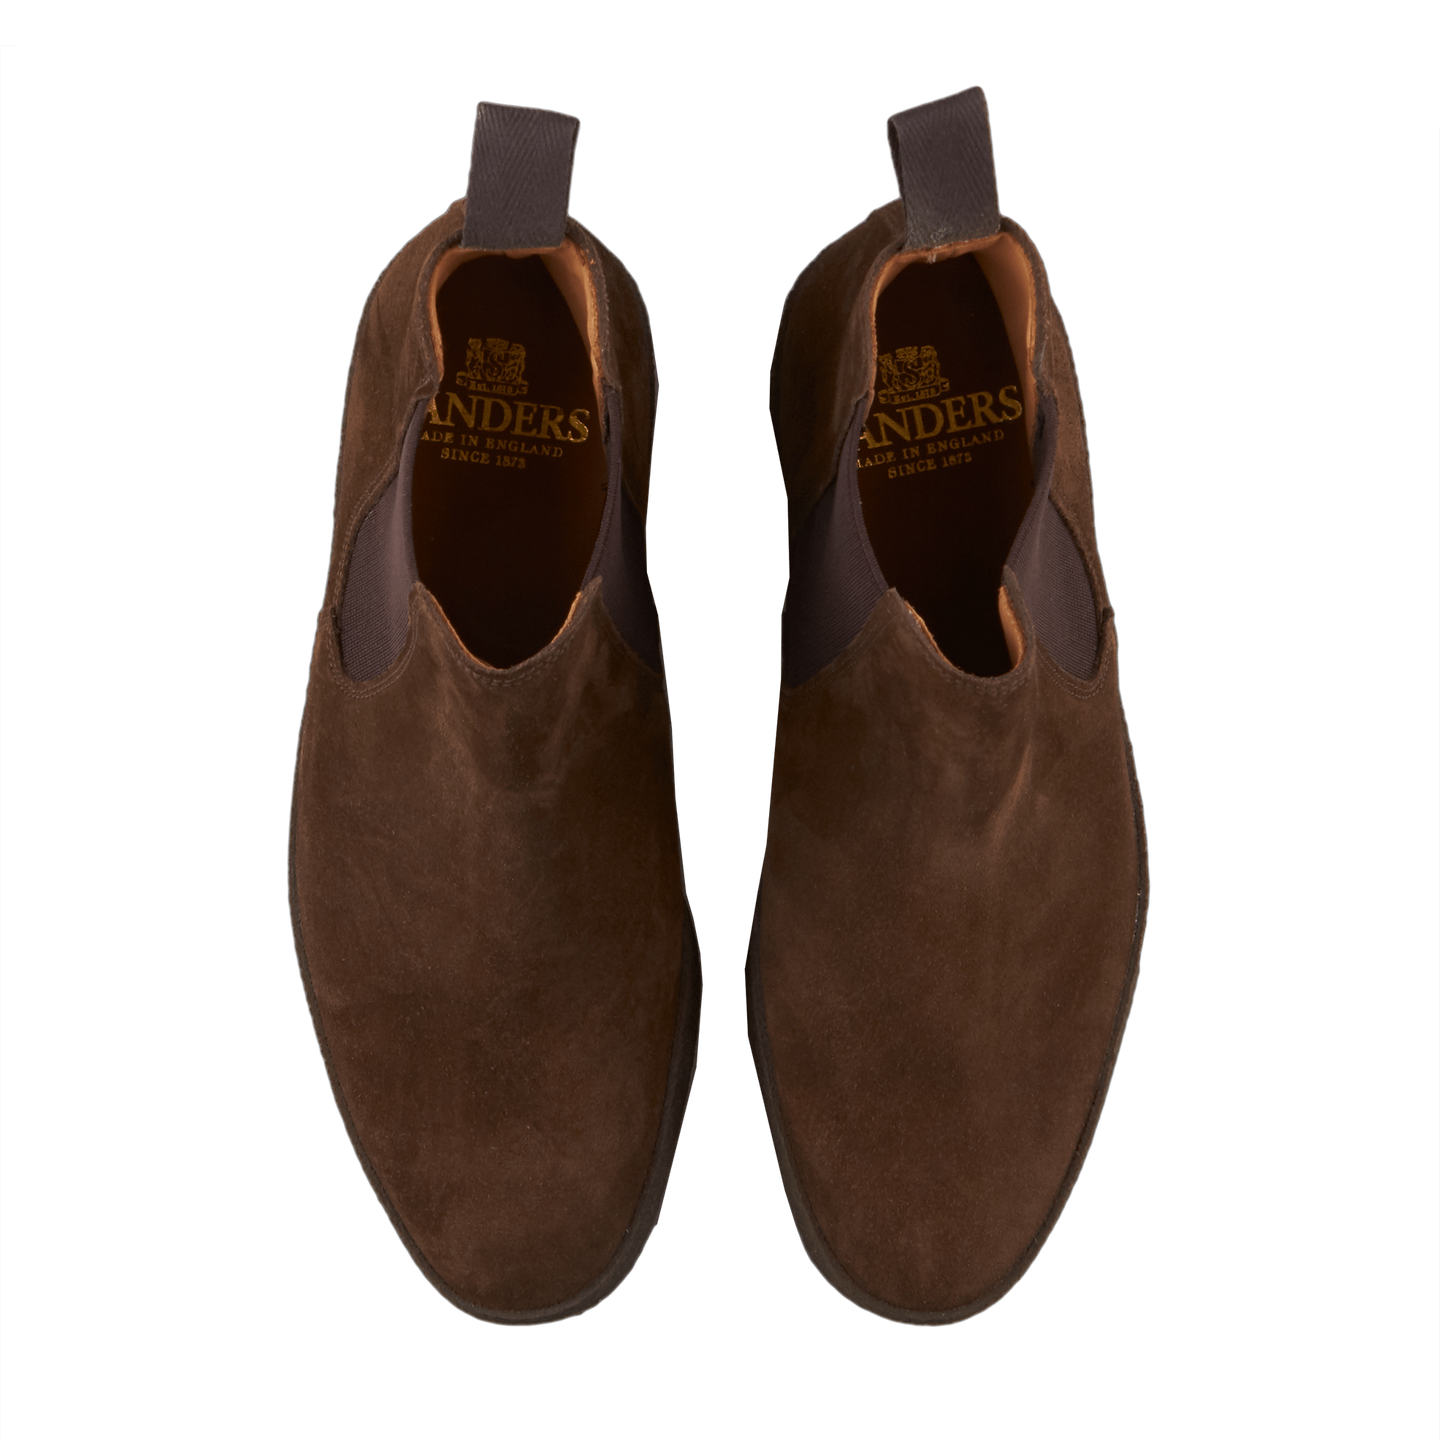 chocolate suede chelsea boots